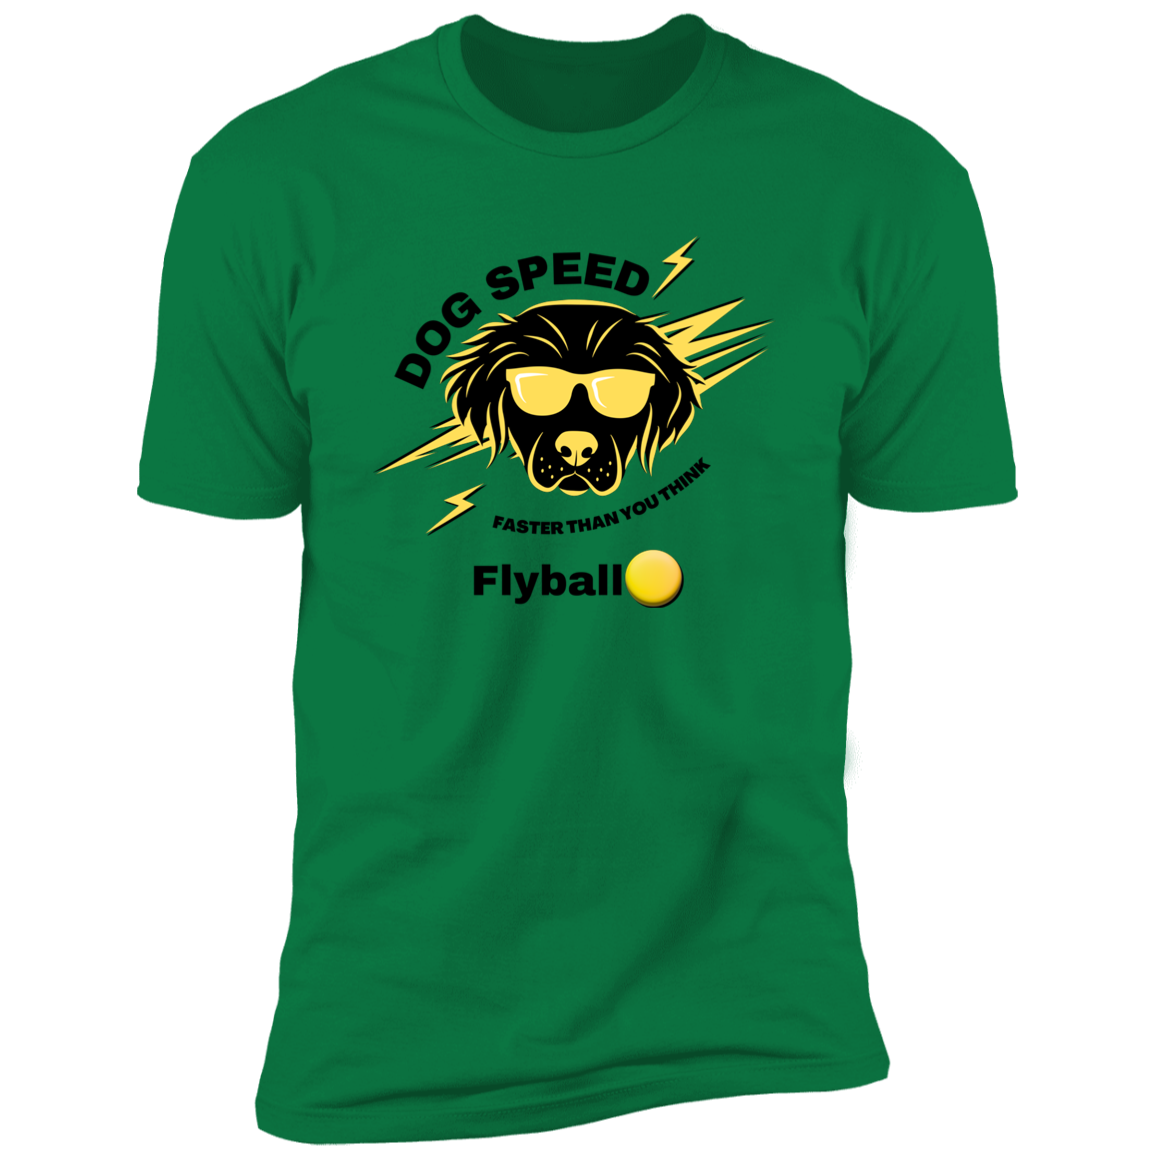 Dog Speed Faster Than You Think Flyball T-shirt, Flyball shirt dog shirt for humans, in kelly green